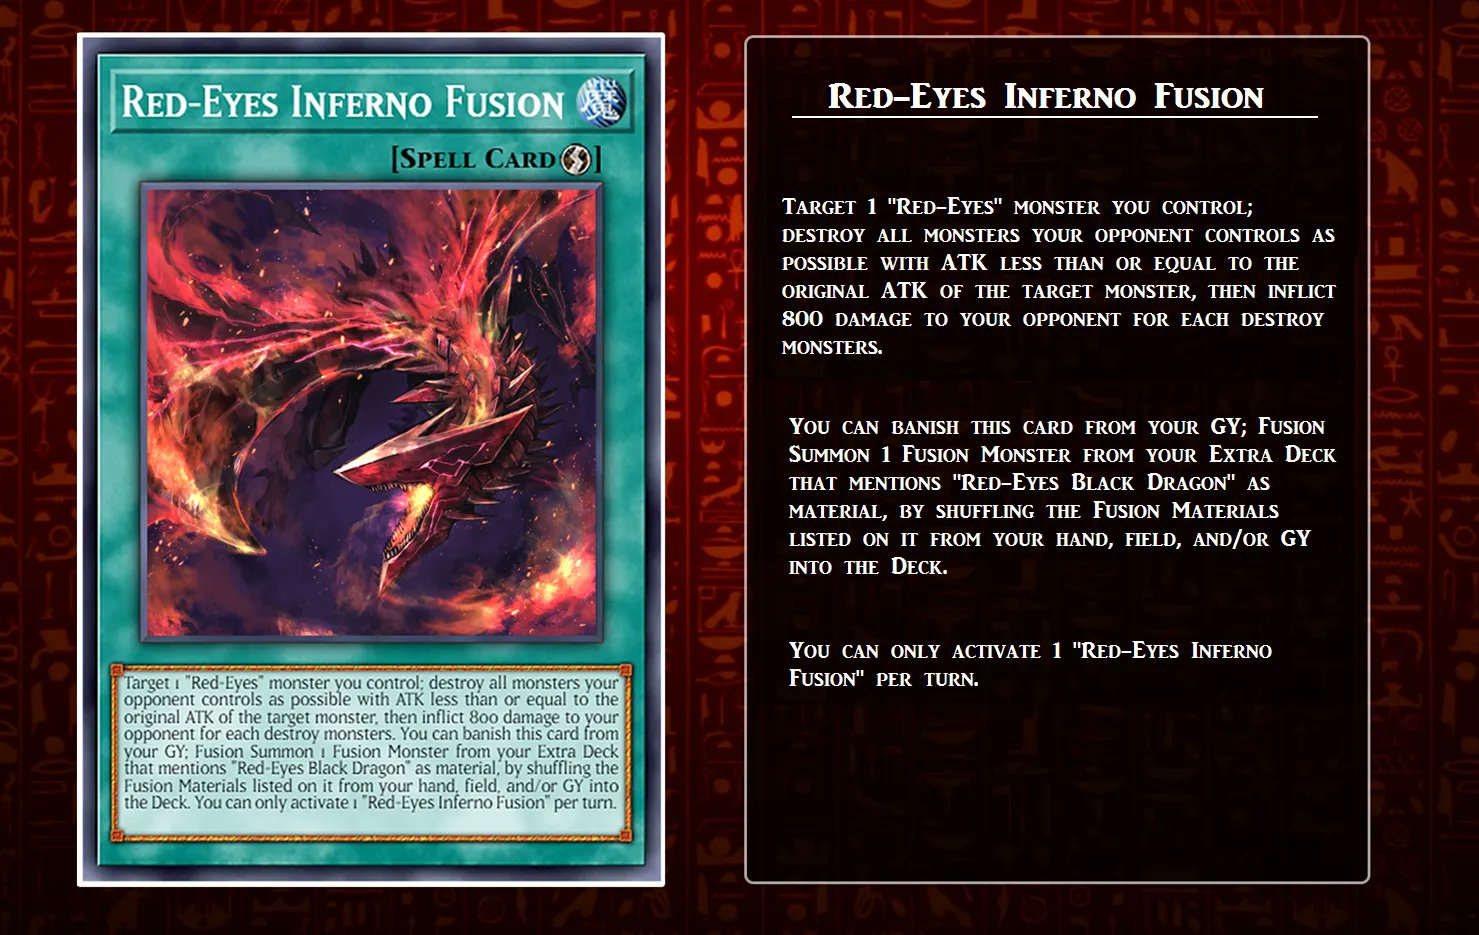 GRIF on Twitter: "Listen up #Konami give the Red-Eyes community a better Fusion card or give "Red-Eyes Fusion" a errata ban "Red-Eyes Dark and before people say